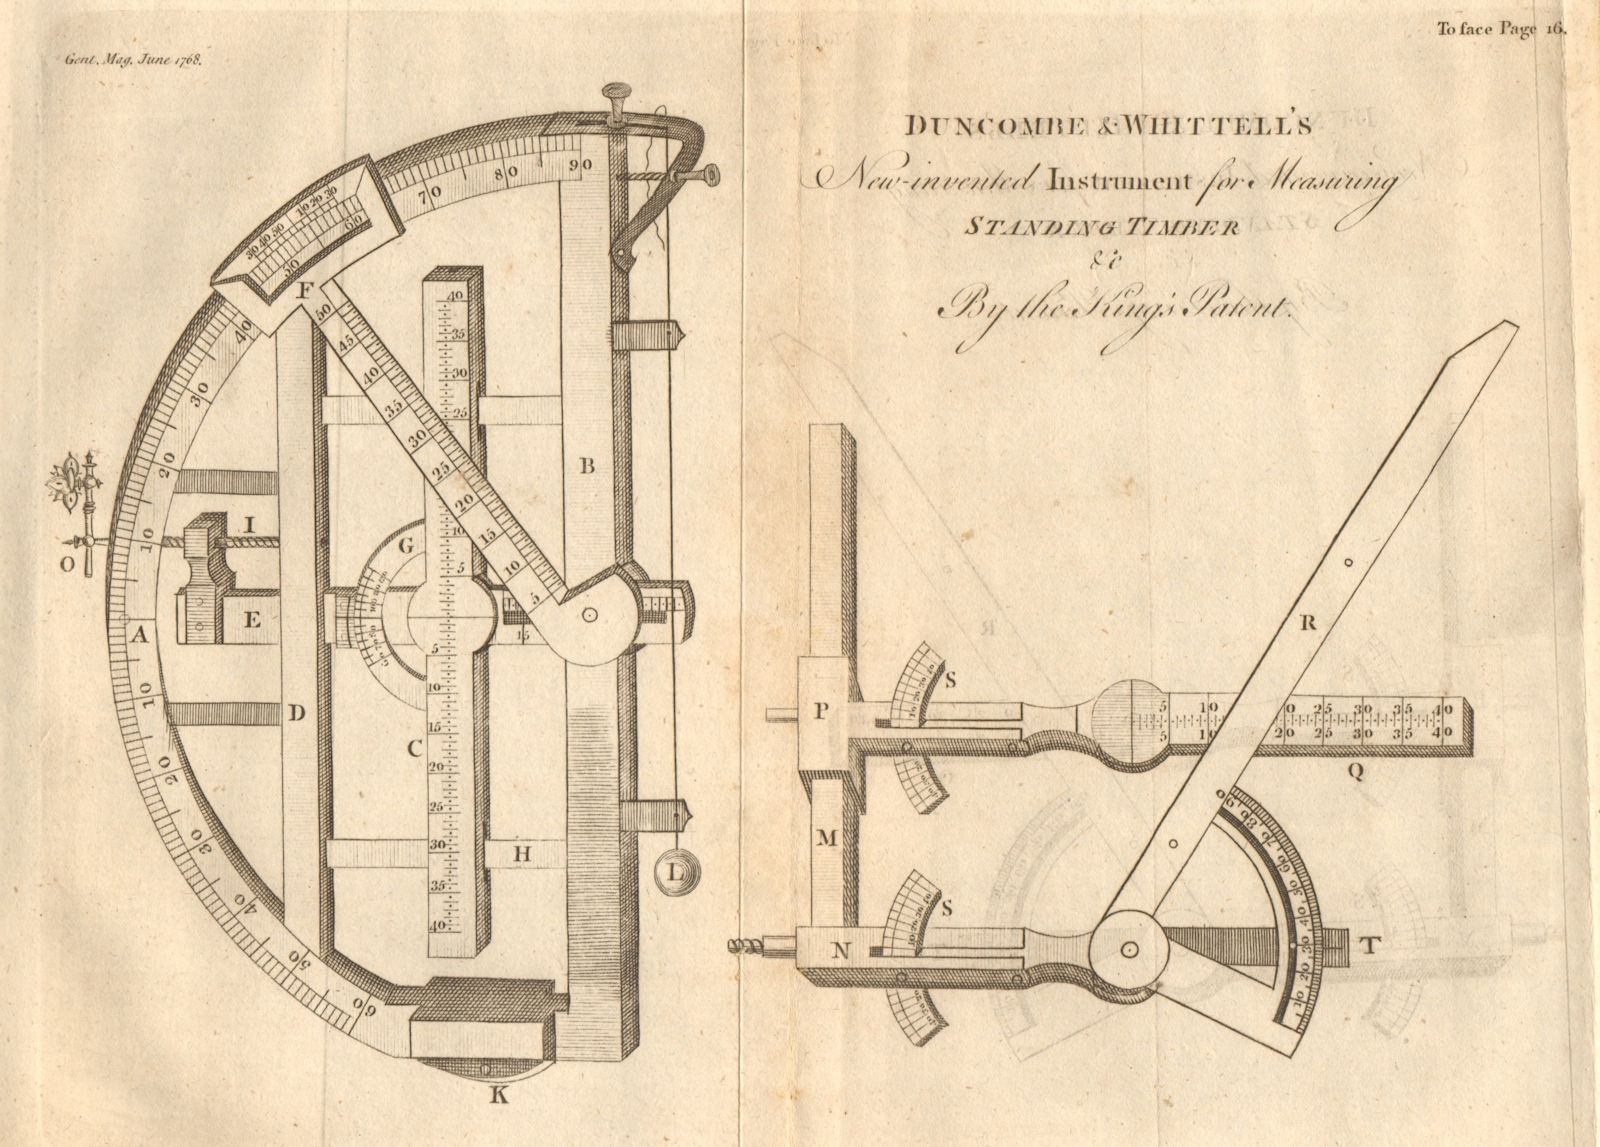 Duncombe & Whittell's dendrometer for measuring standing timber. Patent 1768